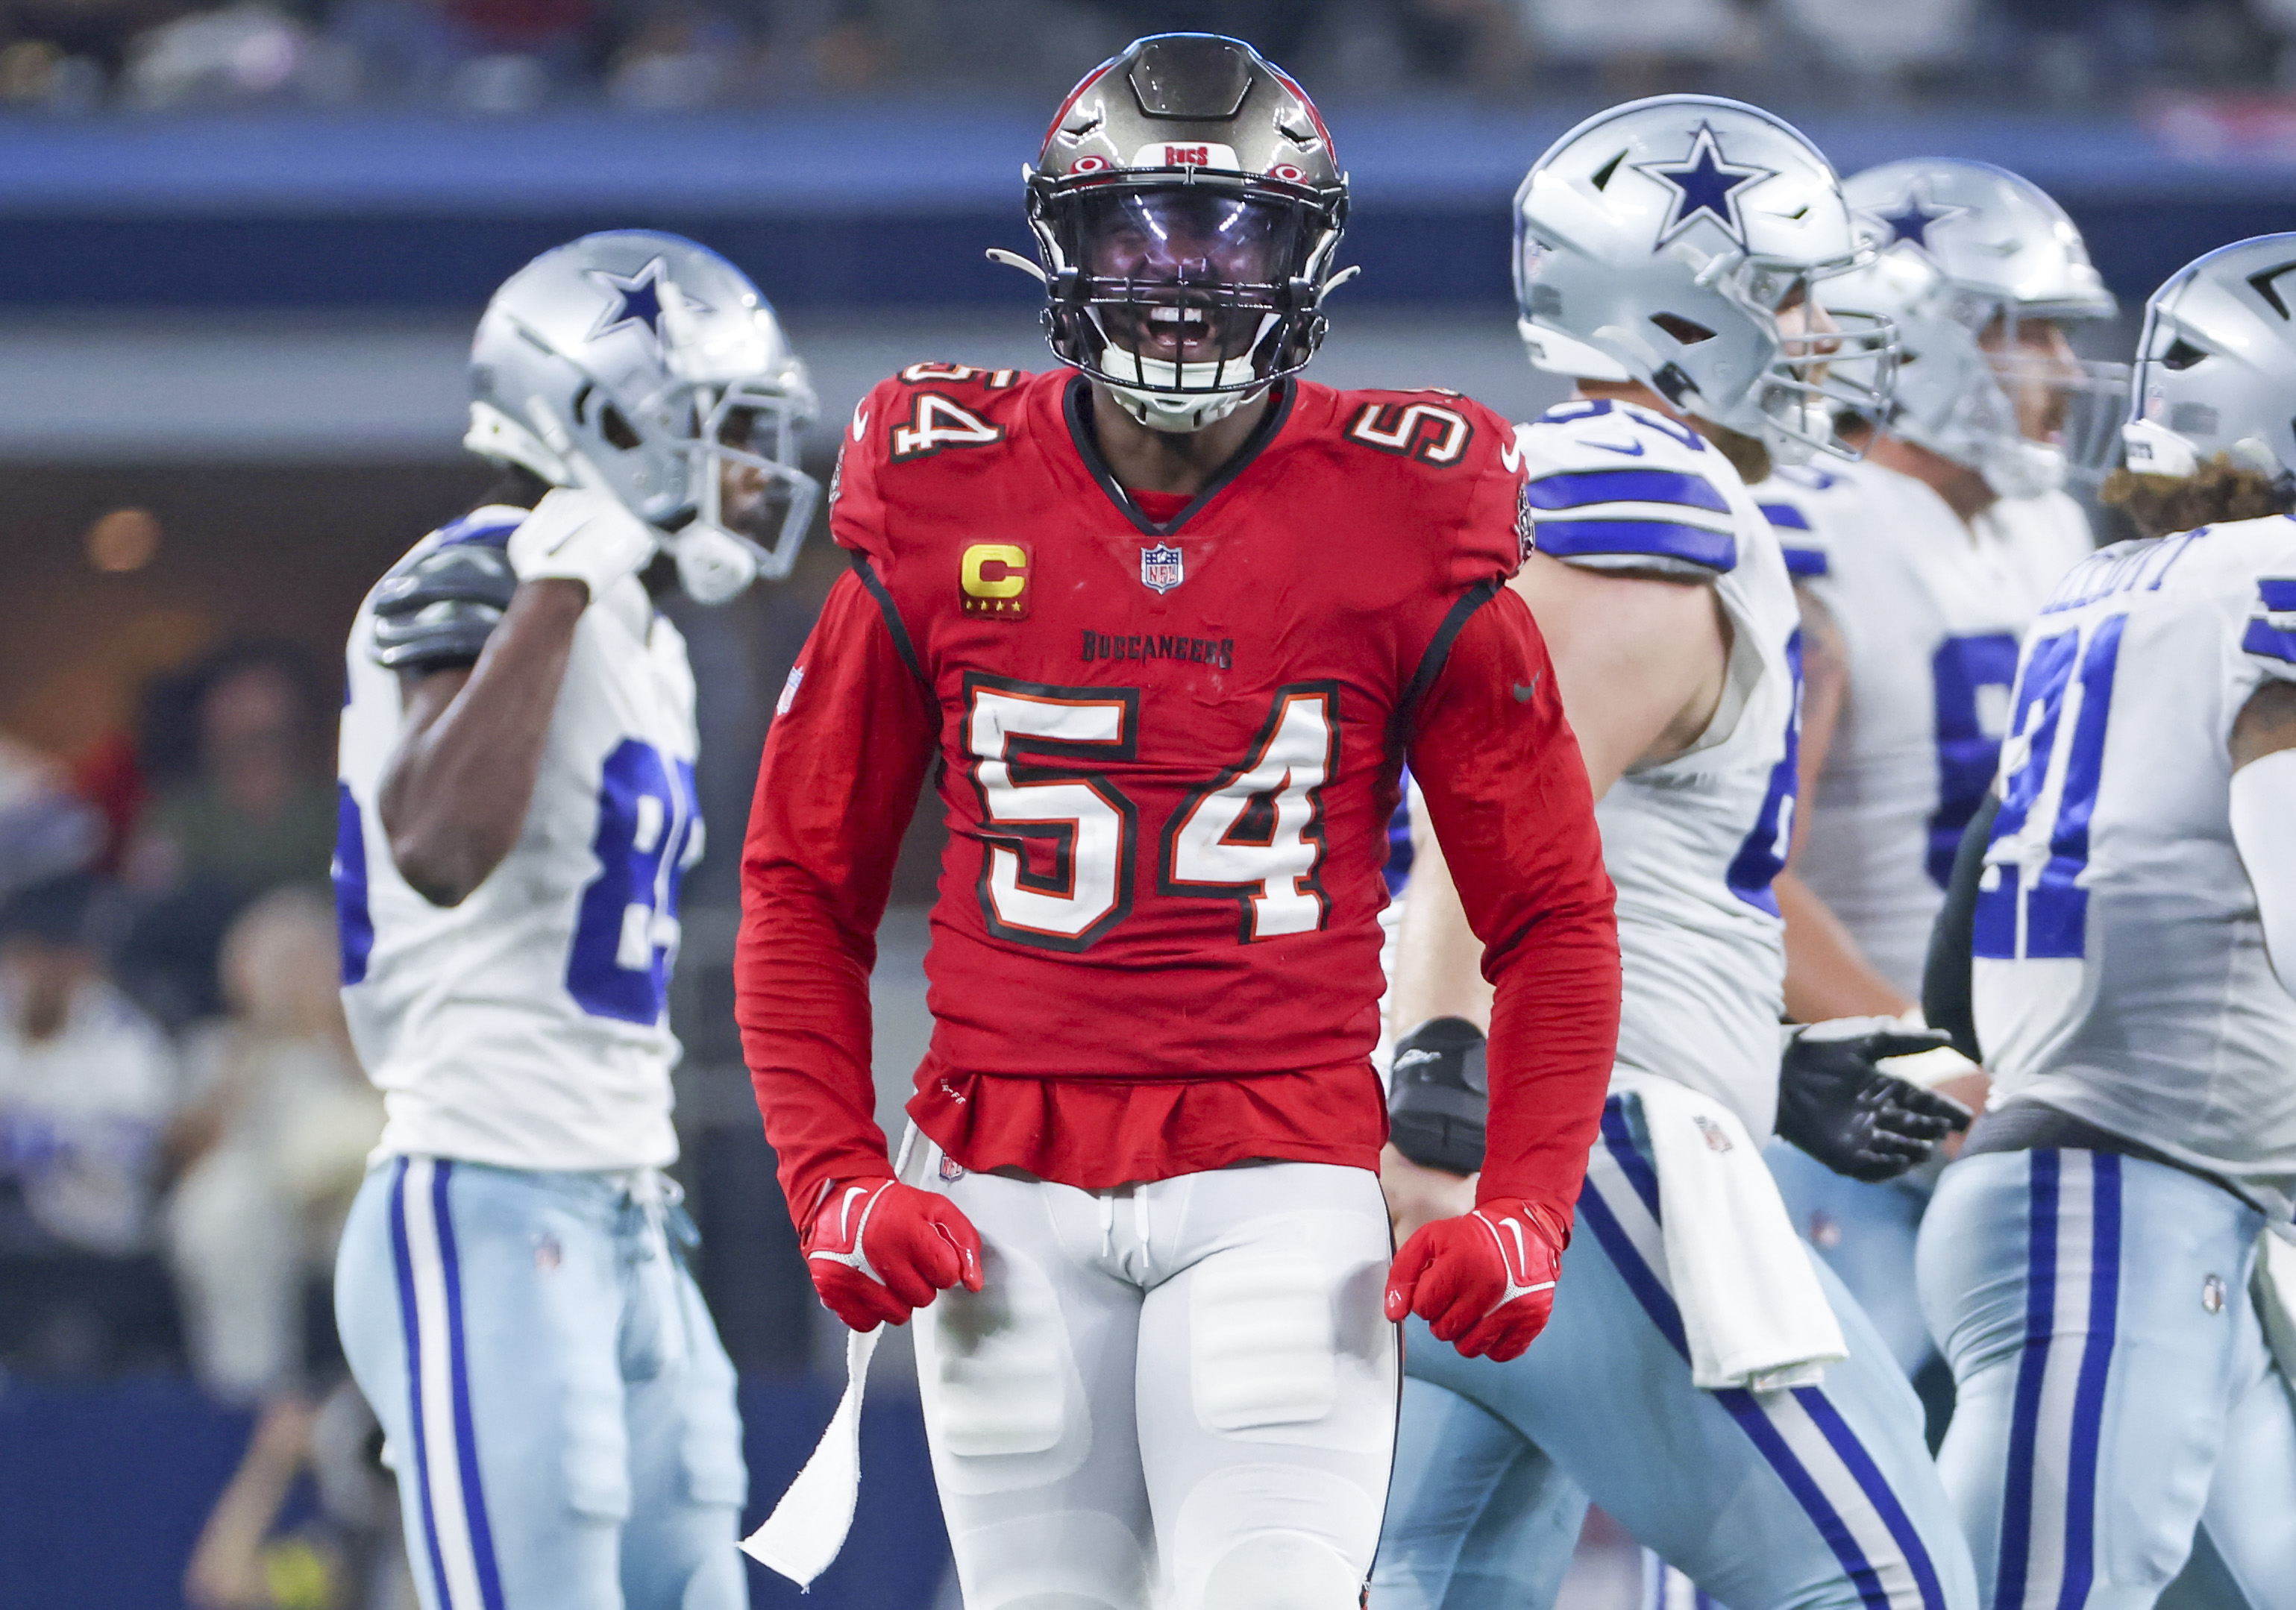 Tampa Bay Buccaneers open as slight home underdog in postseason matchup with Dallas Cowboys